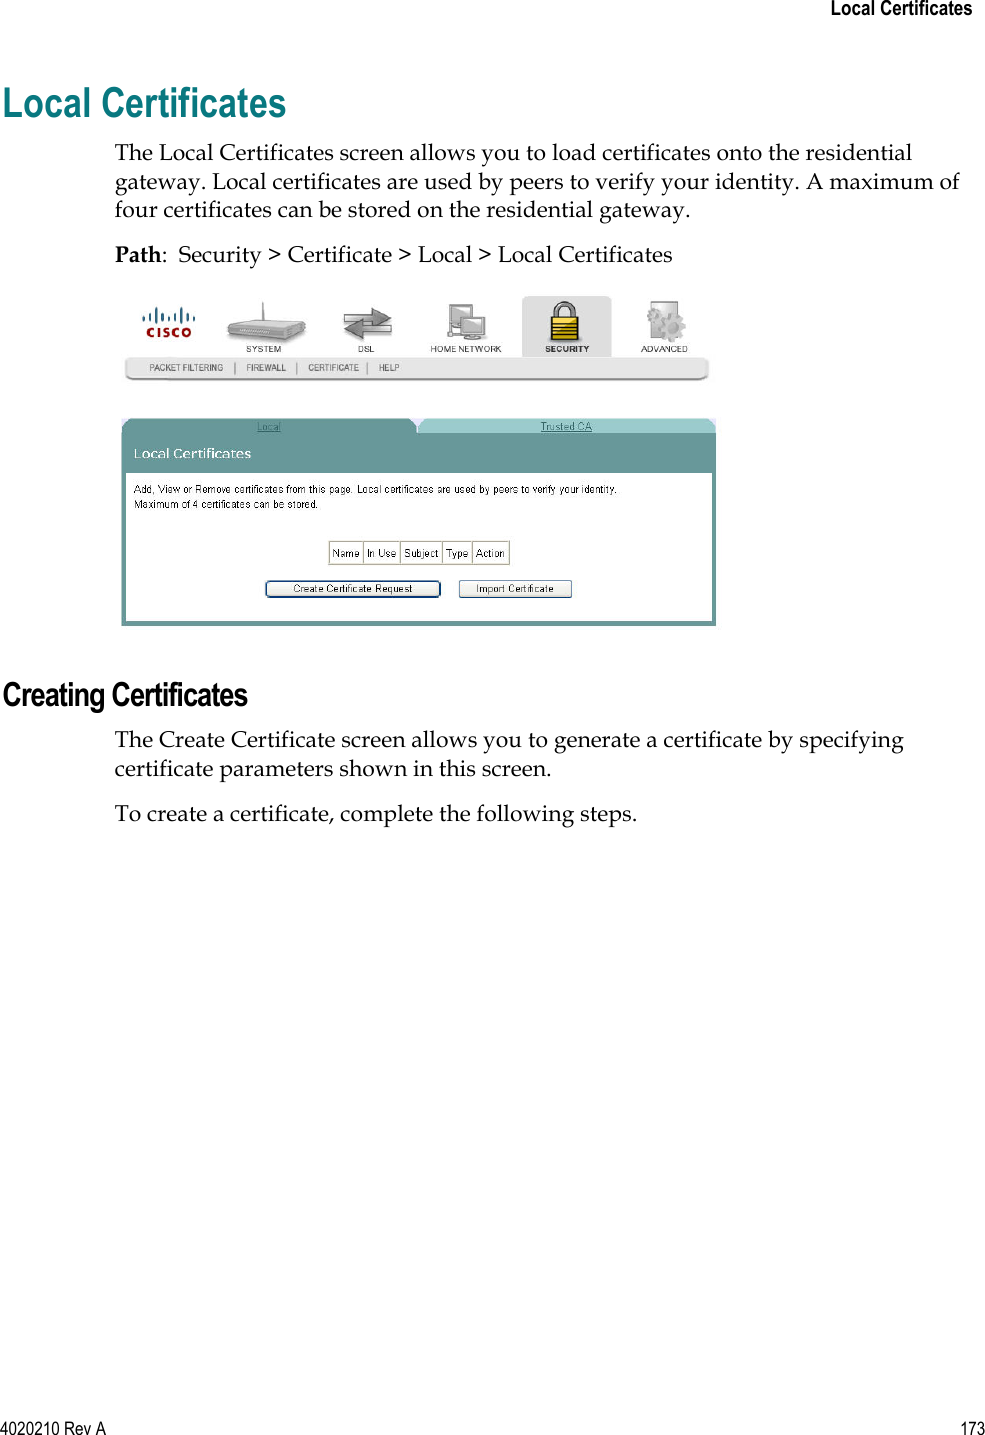   Local Certificates 4020210 Rev A 173  Local Certificates The Local Certificates screen allows you to load certificates onto the residential gateway. Local certificates are used by peers to verify your identity. A maximum of four certificates can be stored on the residential gateway. Path:  Security &gt; Certificate &gt; Local &gt; Local Certificates   Creating Certificates The Create Certificate screen allows you to generate a certificate by specifying certificate parameters shown in this screen. To create a certificate, complete the following steps. 